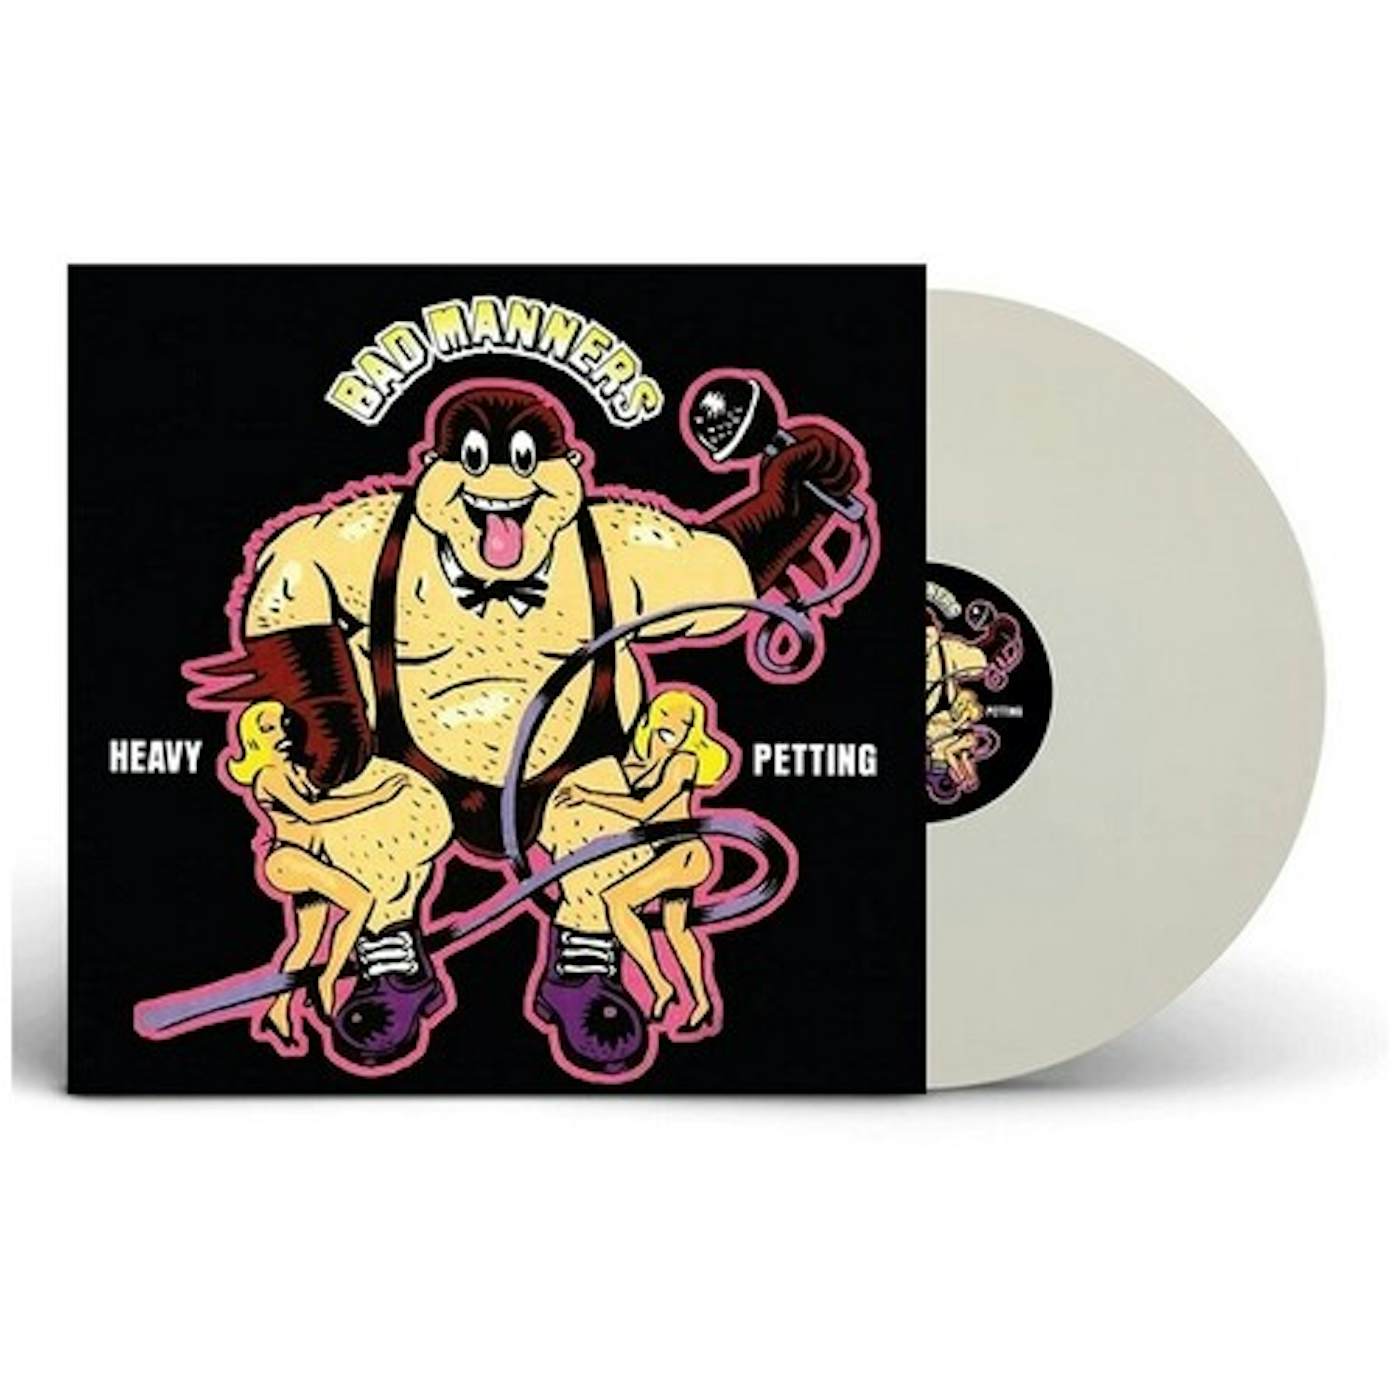 Bad Manners Heavy Petting Vinyl Record